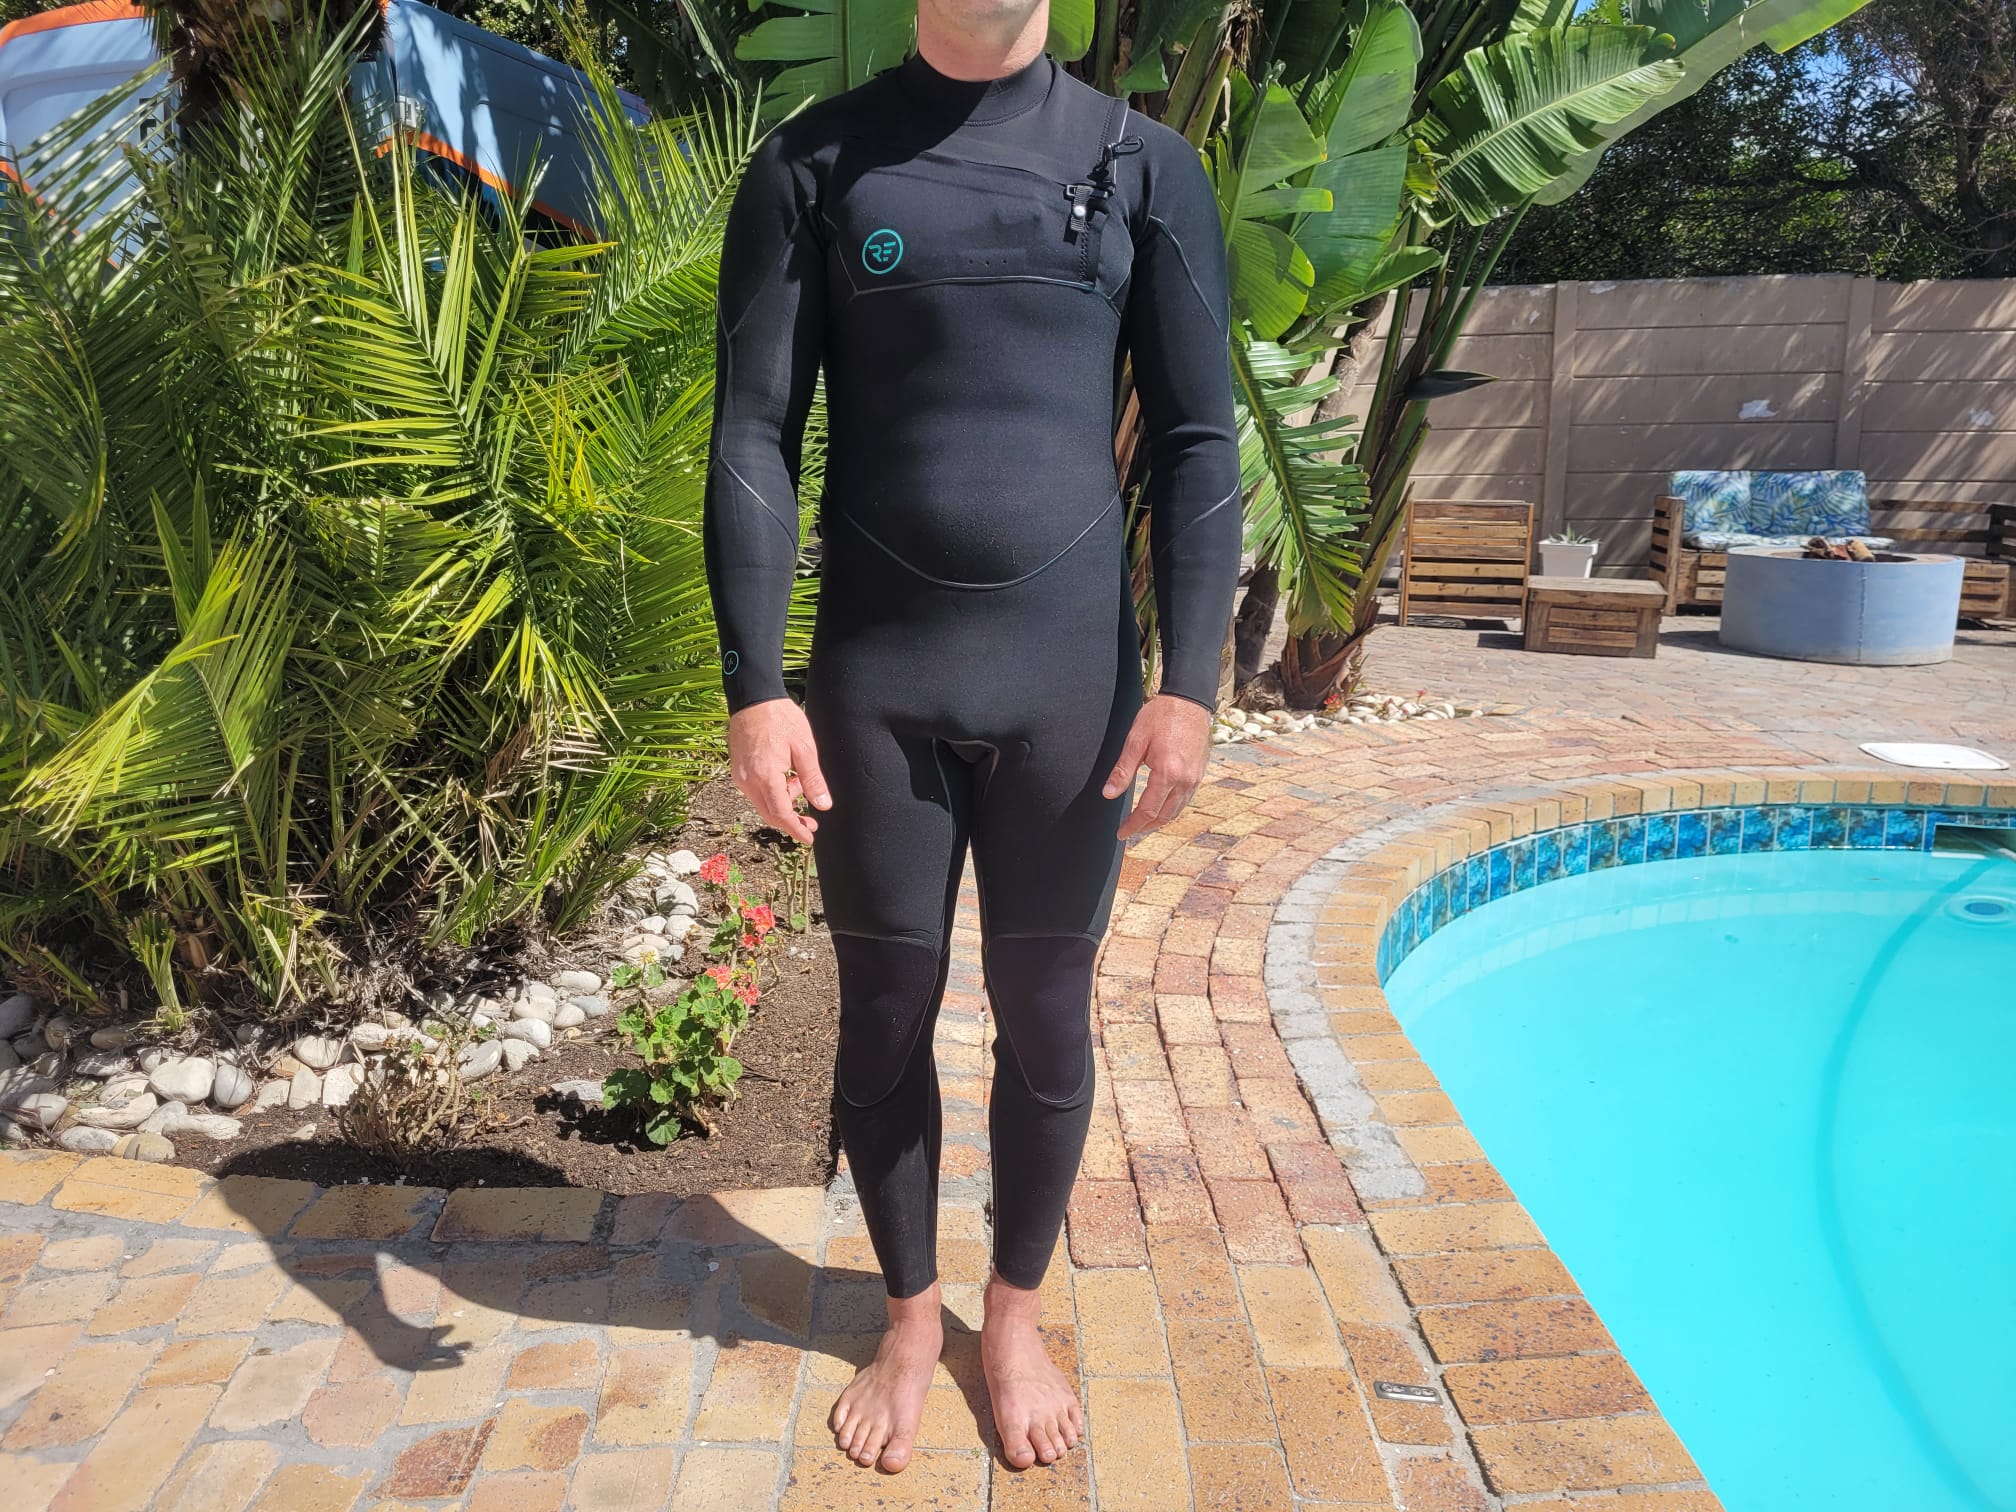 Hey guys so I finally got my first open cell wetsuit 5mm, I'm